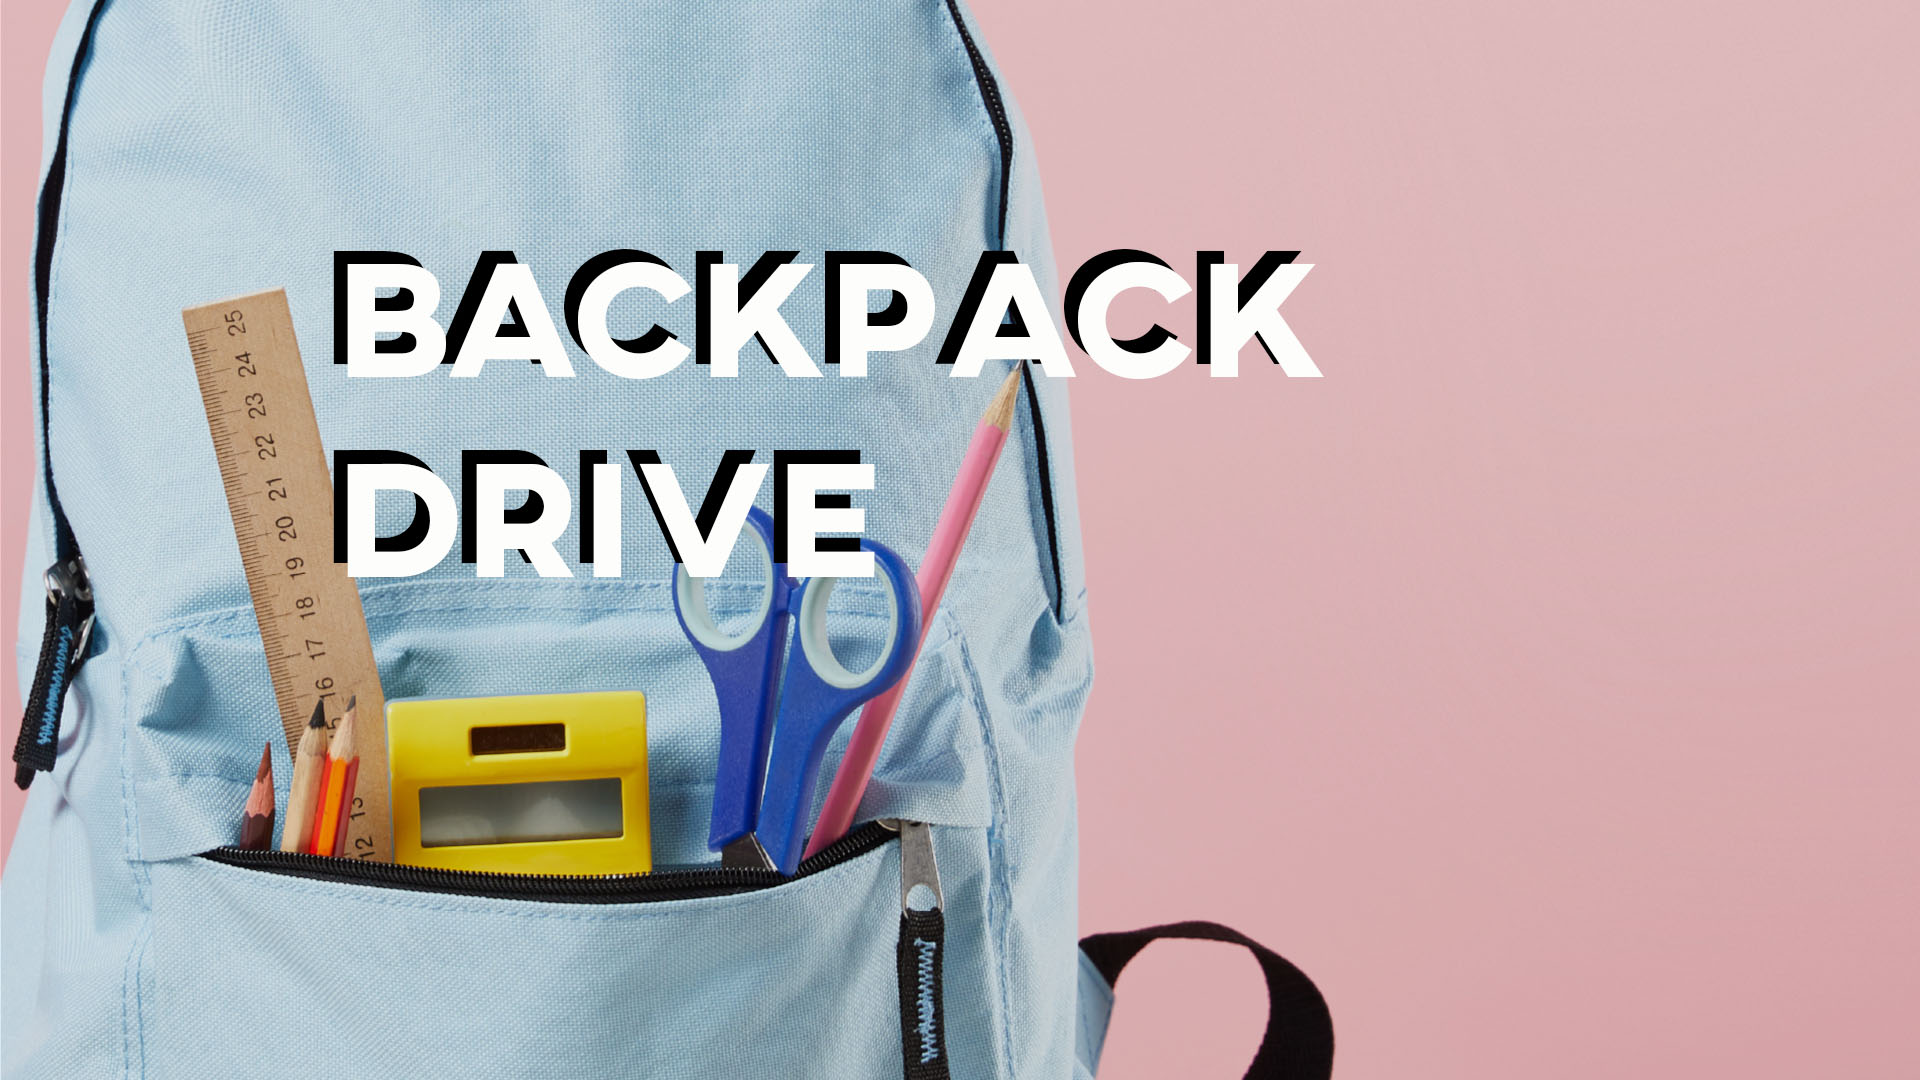 Backpack Drive

Thursday | 5:00-8:00pm
August 1
